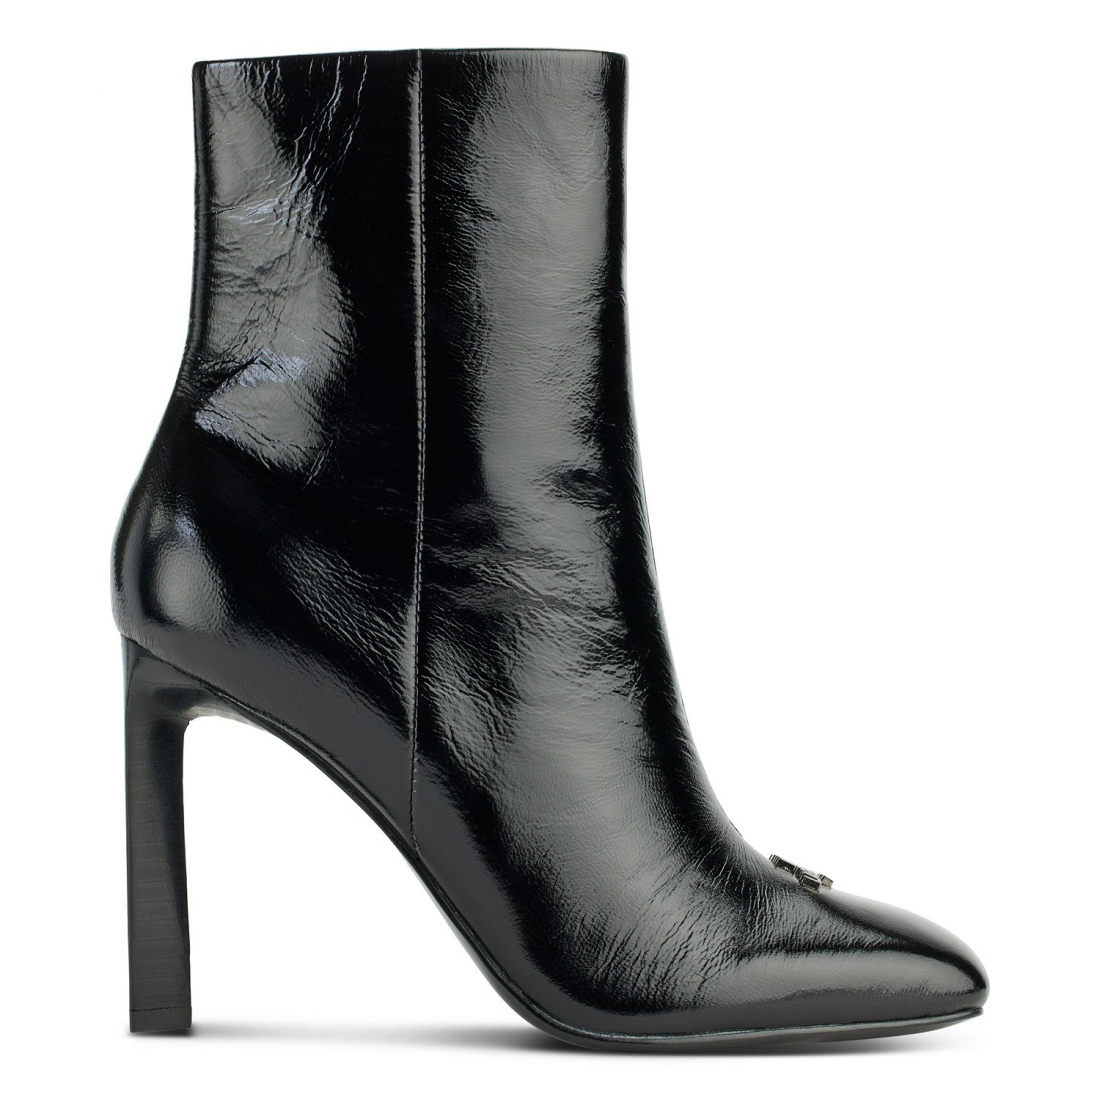 Women's 'Vica Square-Toe Dress' High Heeled Boots